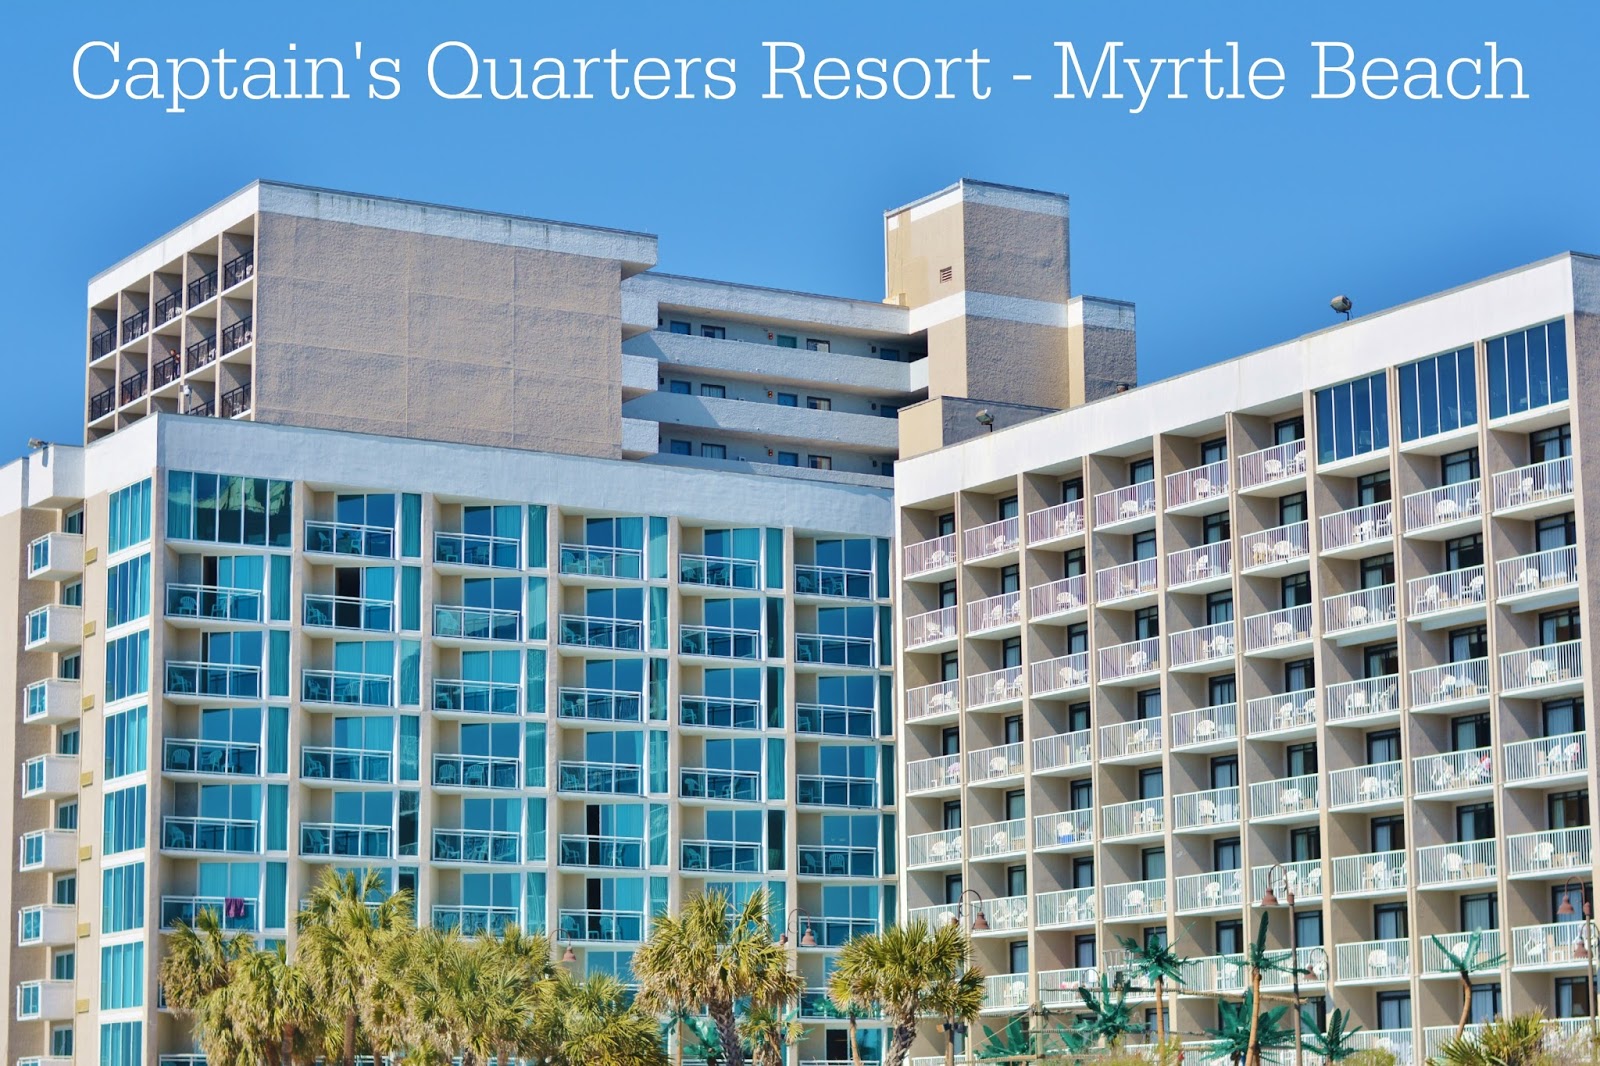 The Captain's Quarters Resort in Myrtle Beach is affordable and packed with family friendly amenities! #travel #familytravel